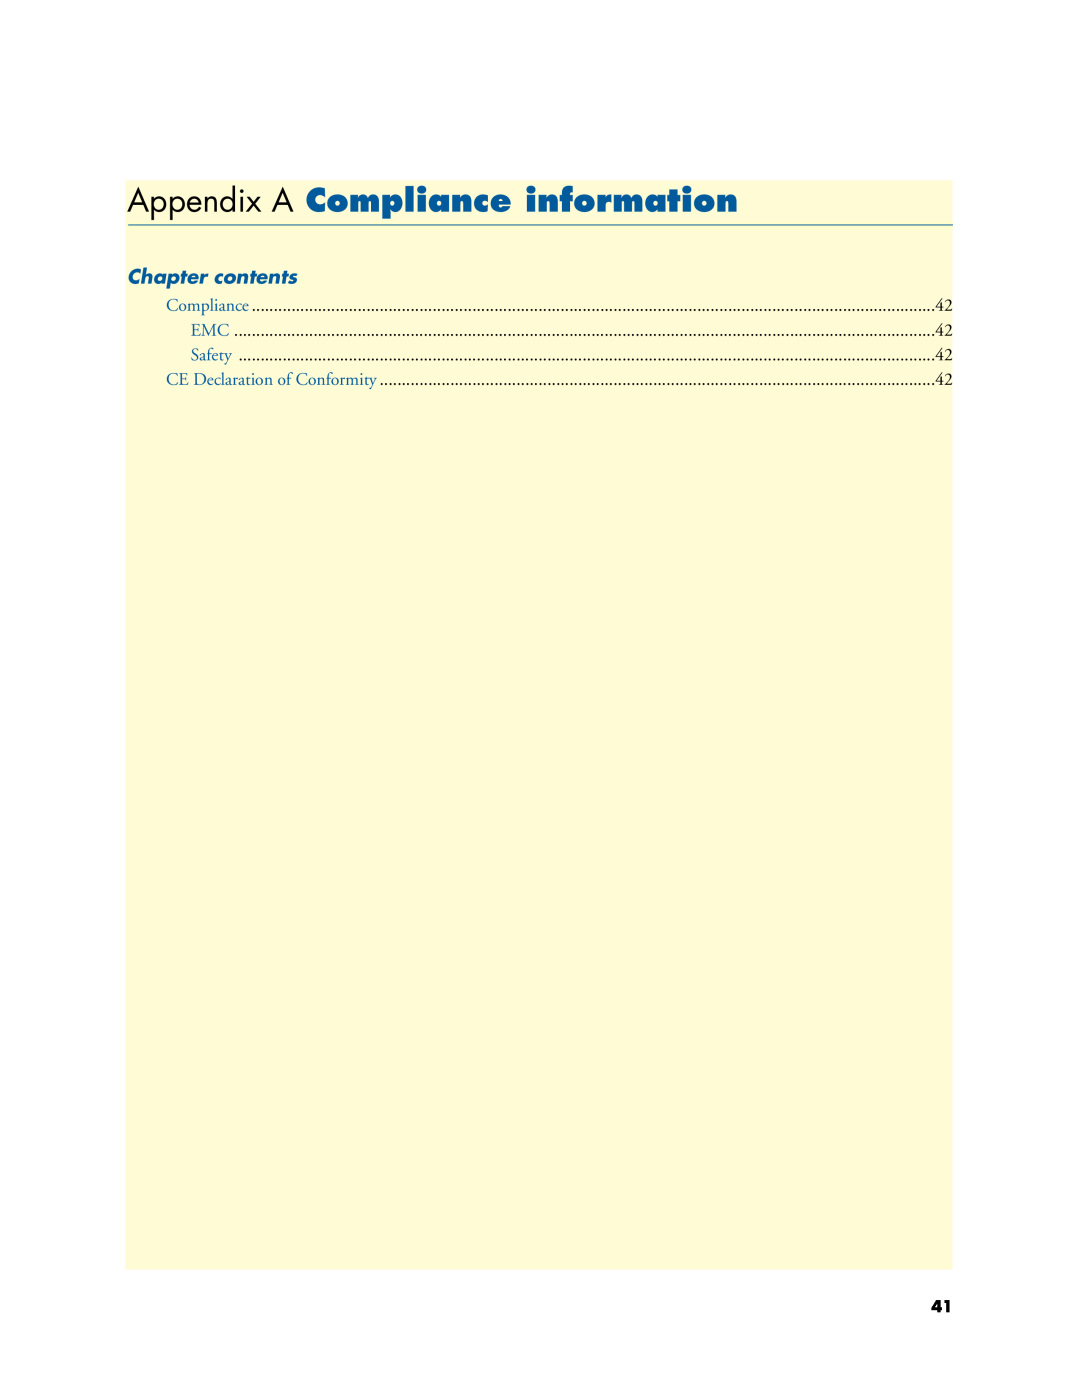 Patton electronic 2292, 2294 manual Appendix A Compliance information, Chapter contents 